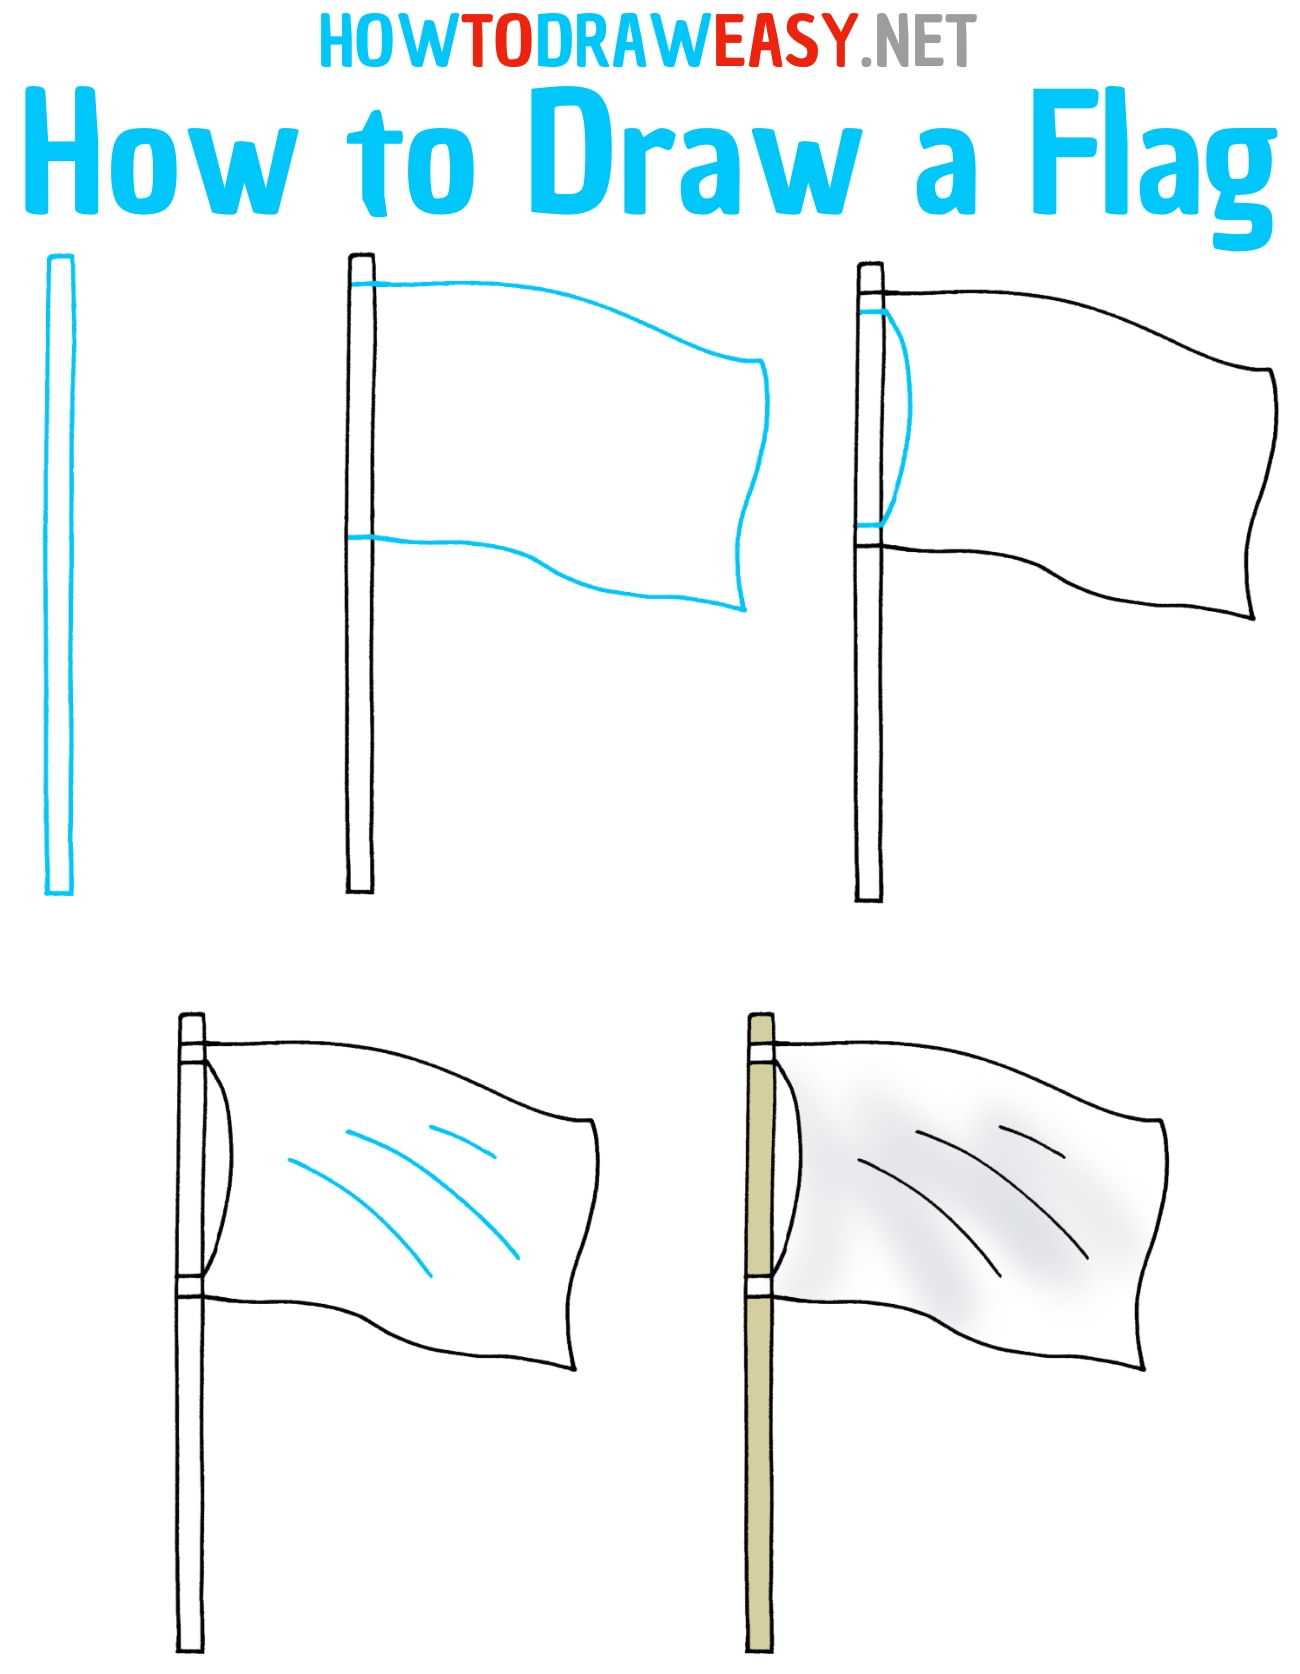 How to Draw a Flag Step by Step